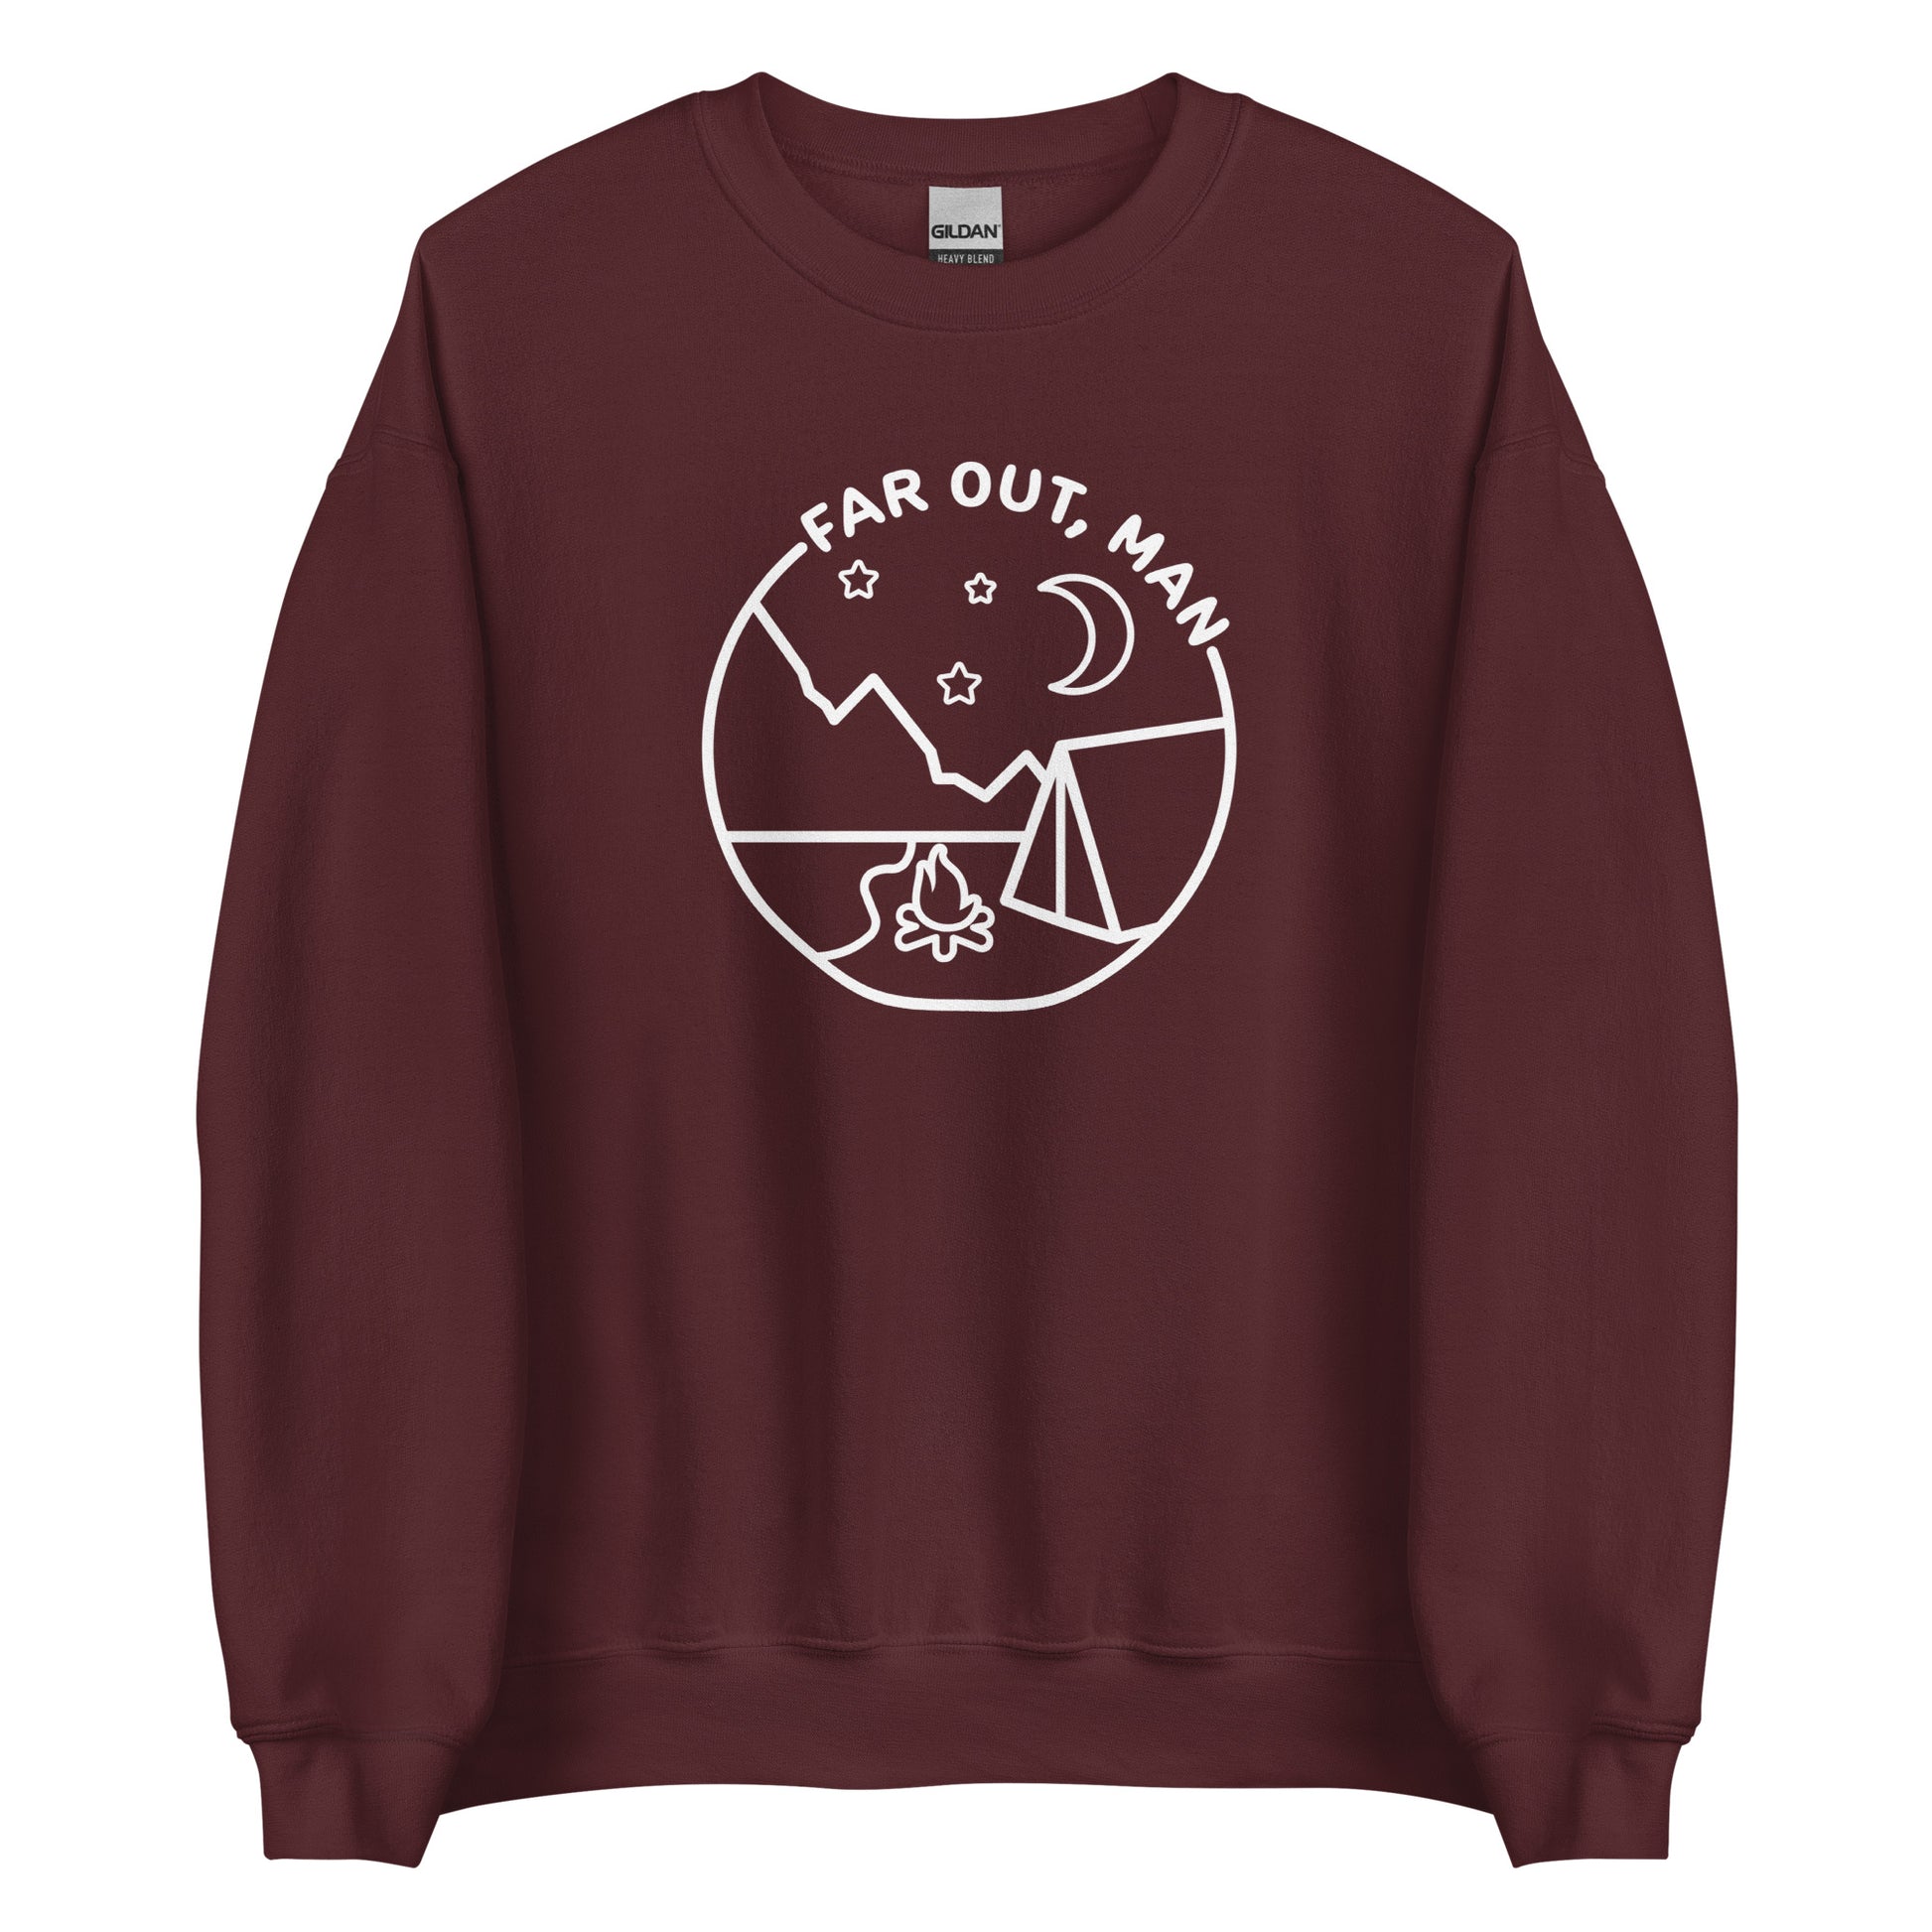 A maroon crewneck sweatshirt featuring a white lineart illustration of a tent and campfire under a night sky. Text in an arc above the illustration reads "Far out, man"